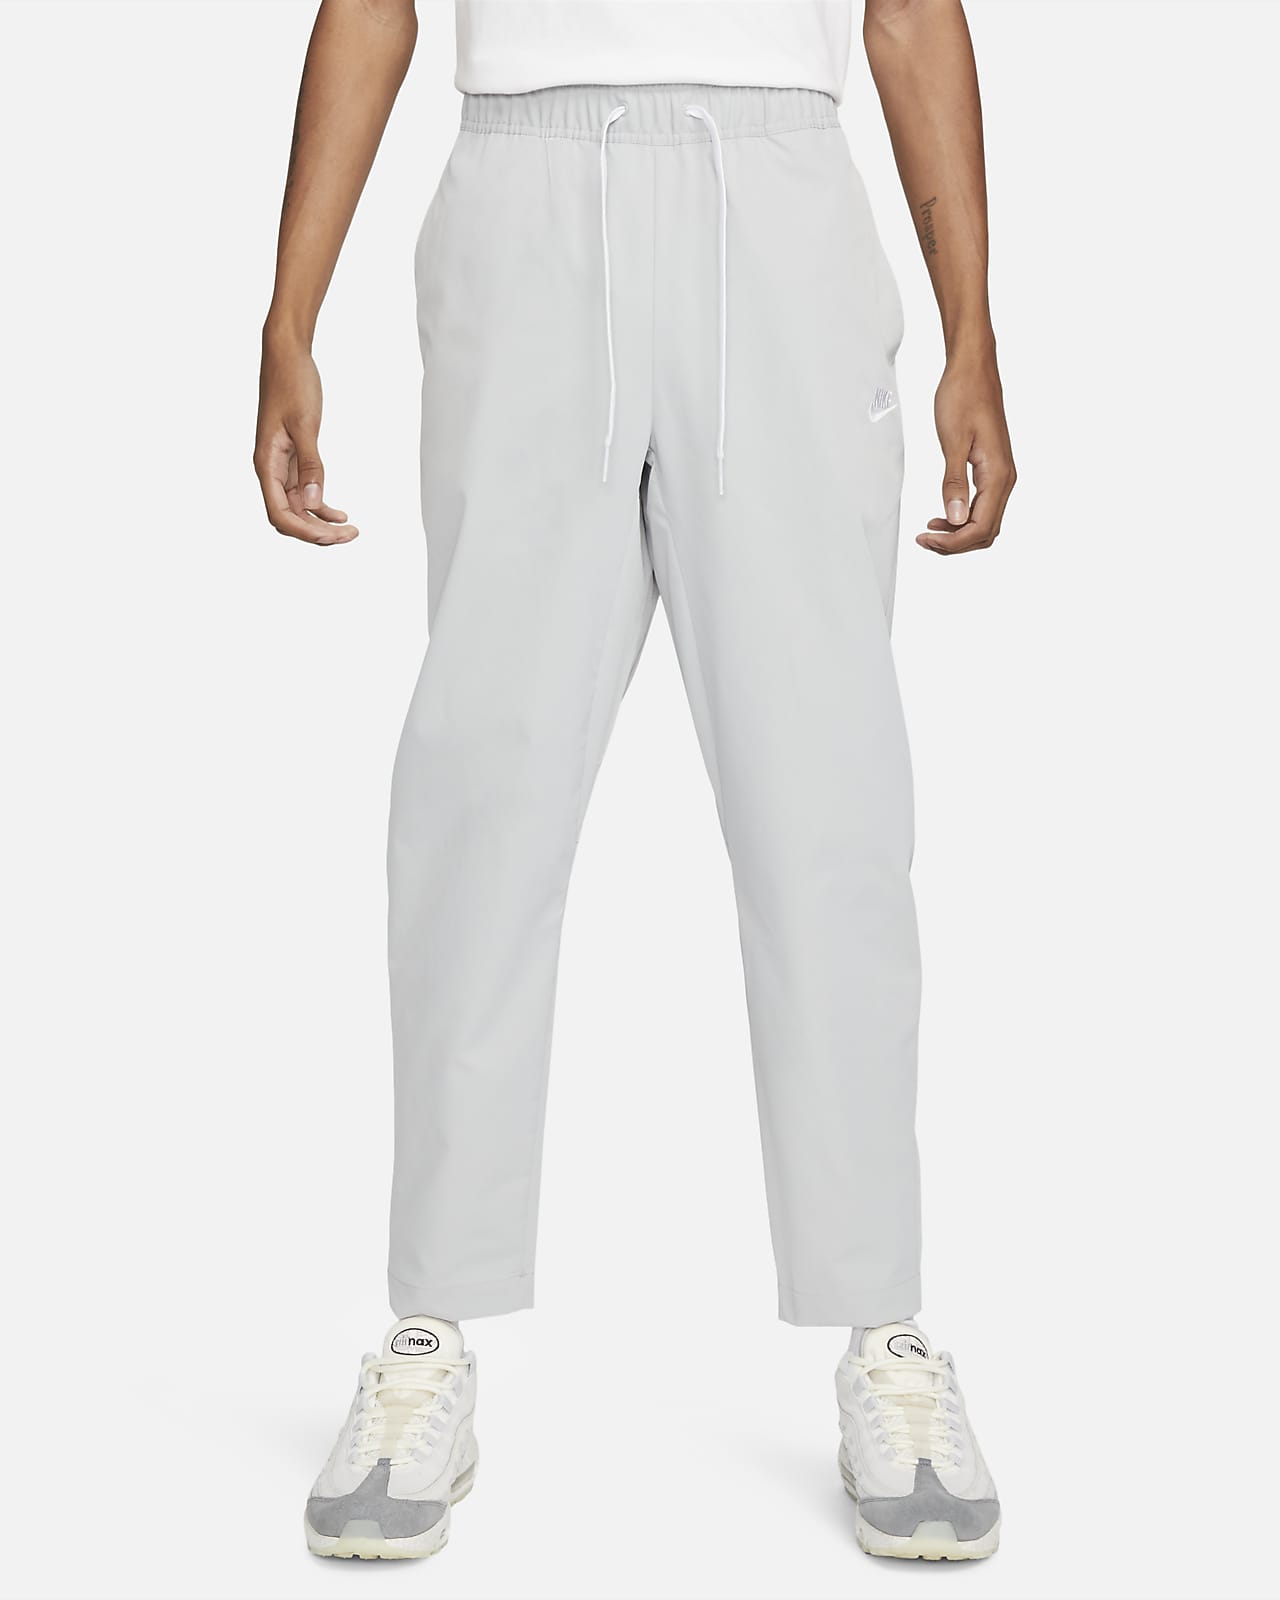 https://static.nike.com/a/images/t_PDP_1280_v1/f_auto,q_auto:eco/4baeedf5-142c-4180-809d-8c9b8c04ac92/club-woven-tapered-leg-trousers-cjrfhk.png